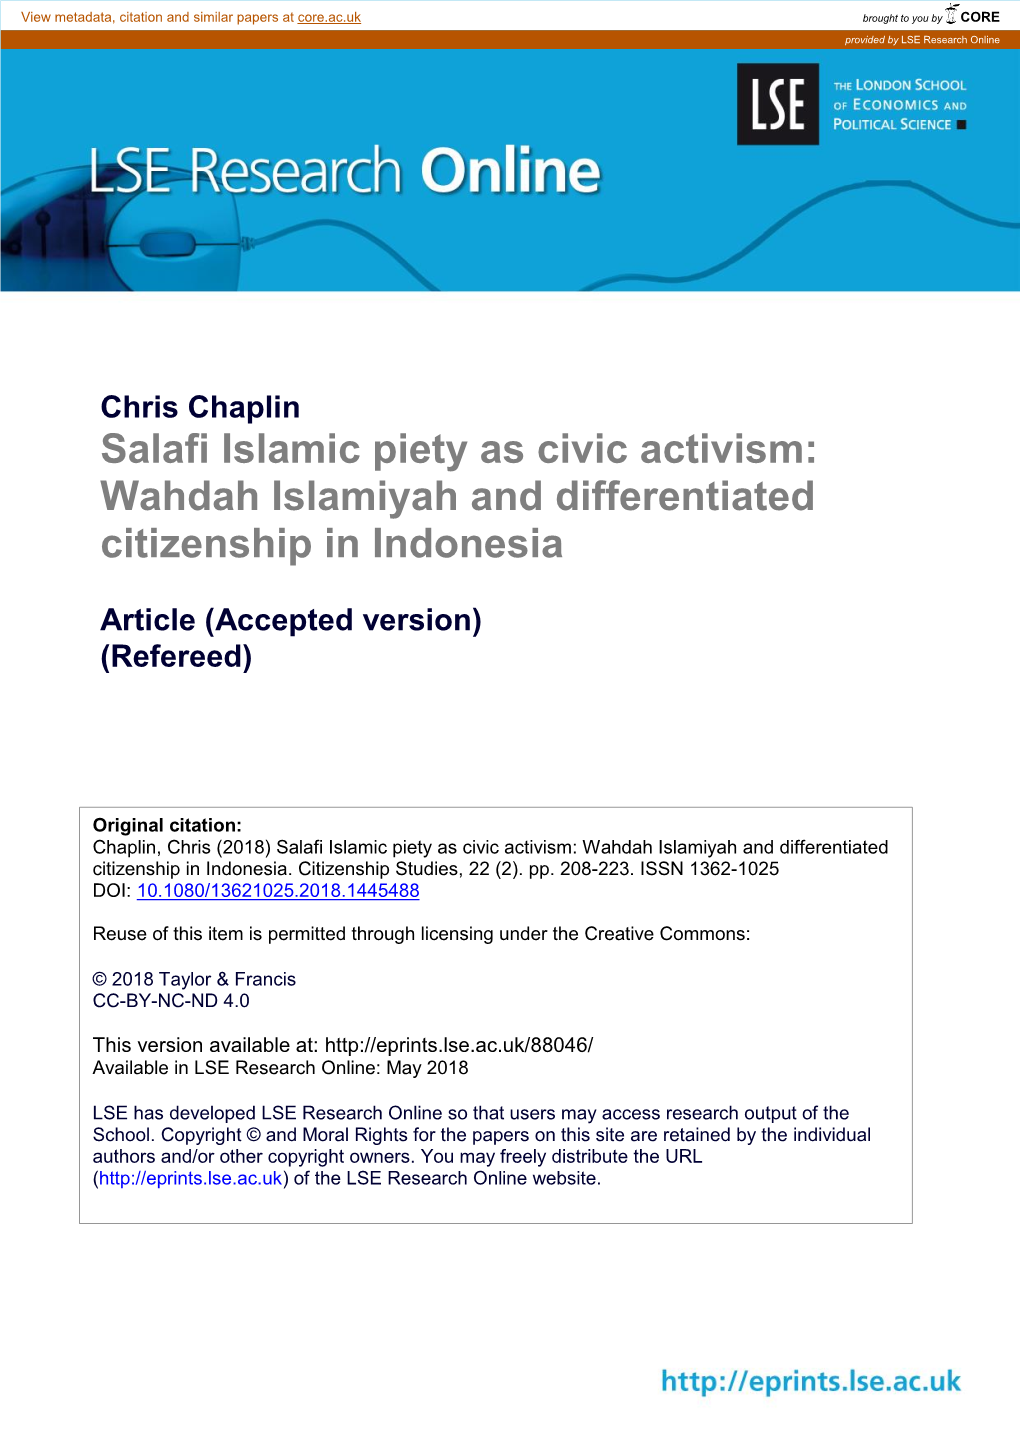 Wahdah Islamiyah and Differentiated Citizenship in Indonesia